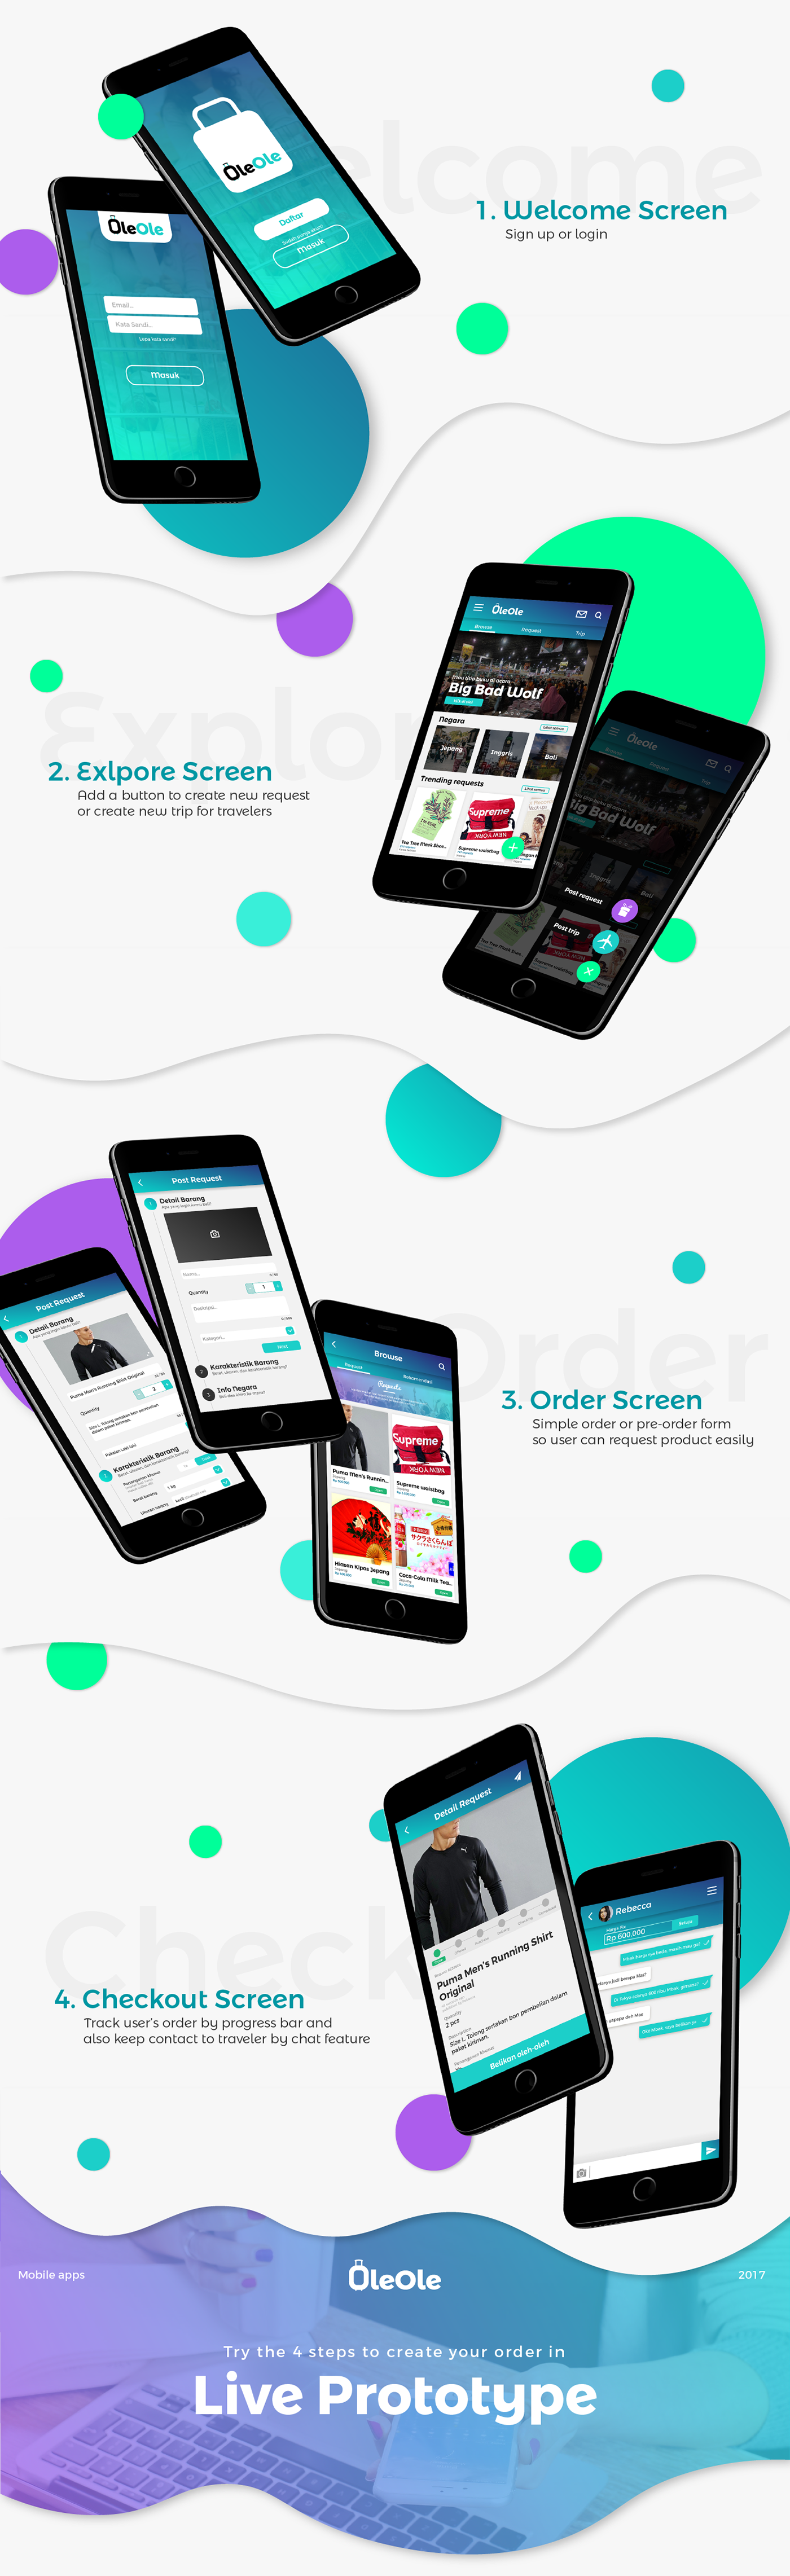 ui design interaction Mobile apps